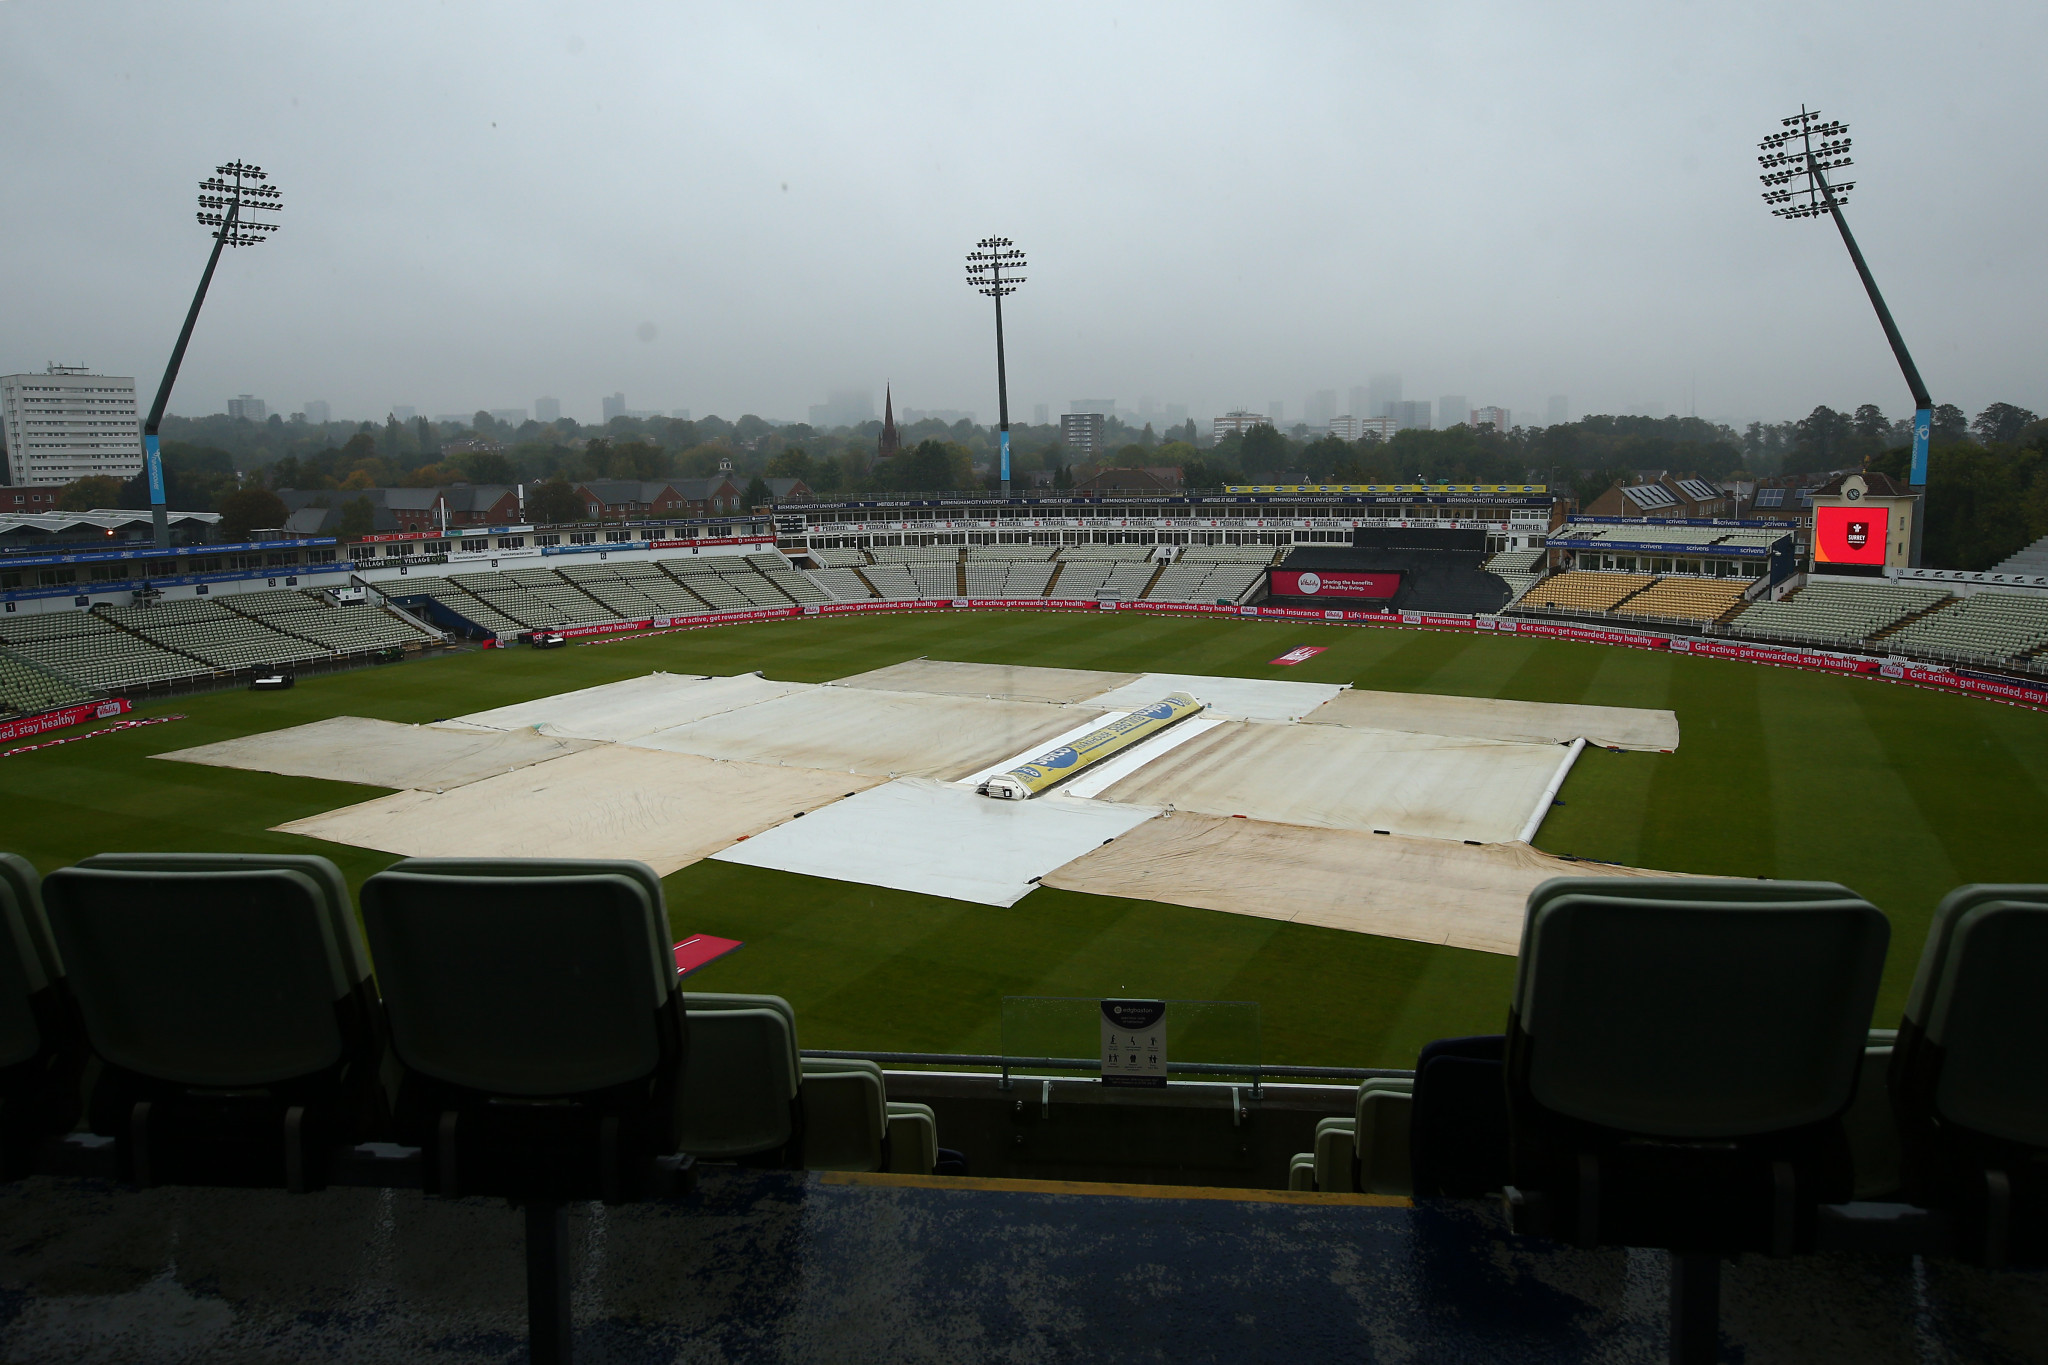 England test match to be at 70 per cent capacity as part of pilot events